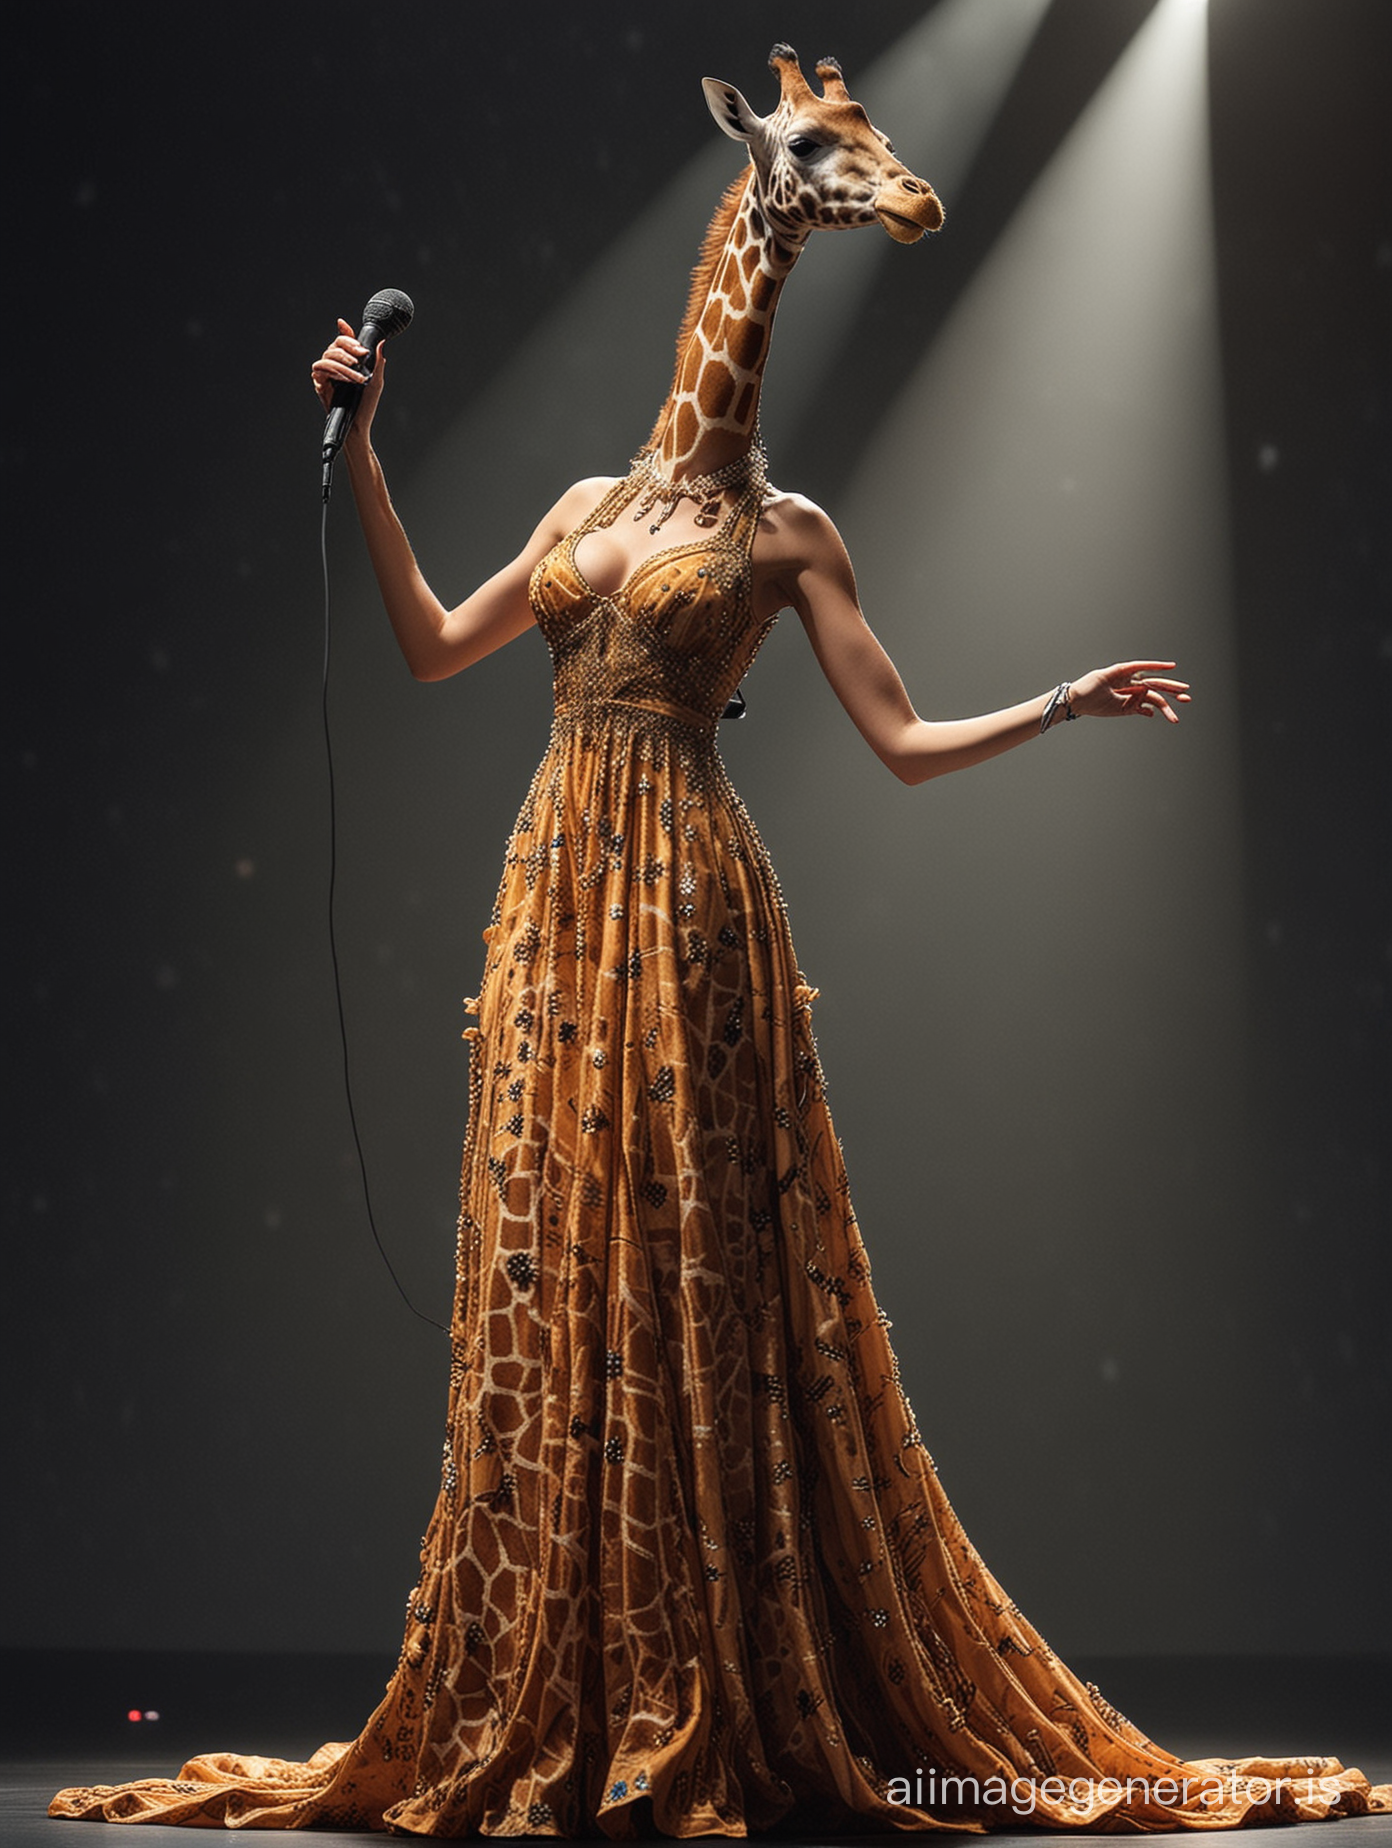 make a giraffe like a singer in the big stage.wear a beutiful long dress and a micrhphon fron og her mouse make it real don't simplify the details and show the atmosphere of concert properly